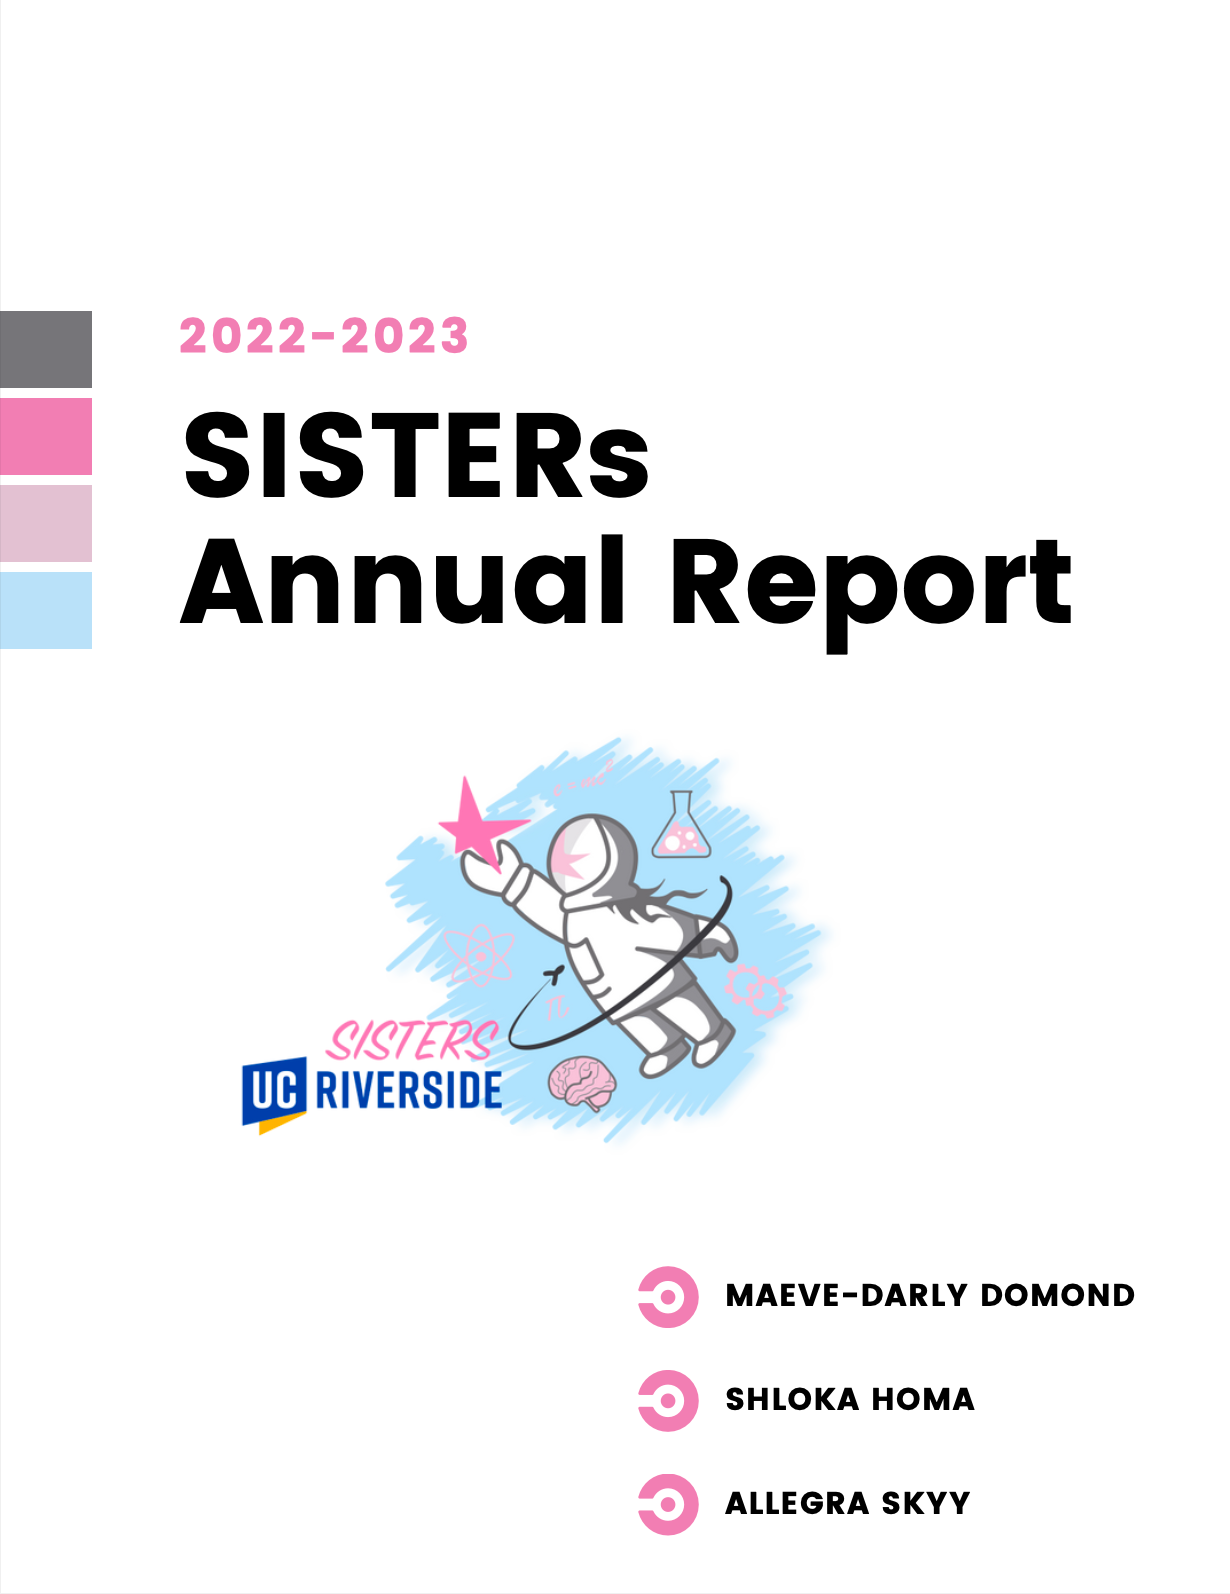 Sisters 2022-2023 annual report cover